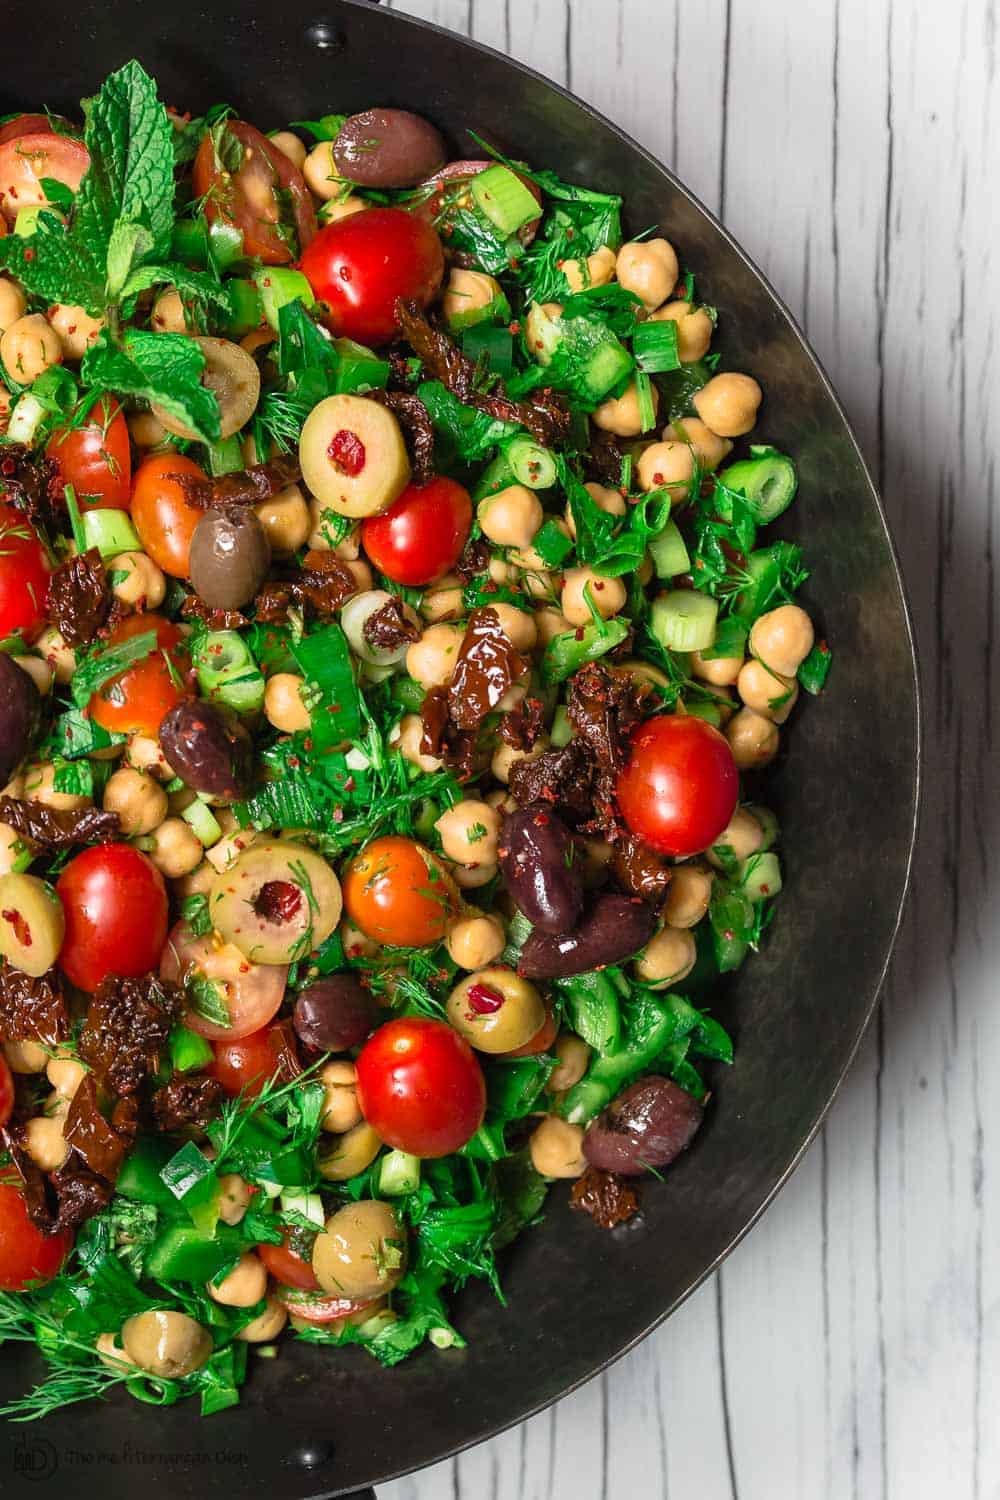 Balela Salad Recipe | The Mediterranean Dish. Bright, flavor-packed Mediterranean chickpea salad with chopped veggies, lots of herbs, and favorites like olives and sun-dried tomatoes. A zesty dressing brings it all together! A simple recipe from TheMediterraneanDish.com #balela #chickpeasalad #mediterraneanfood #mediterraneanrecipe